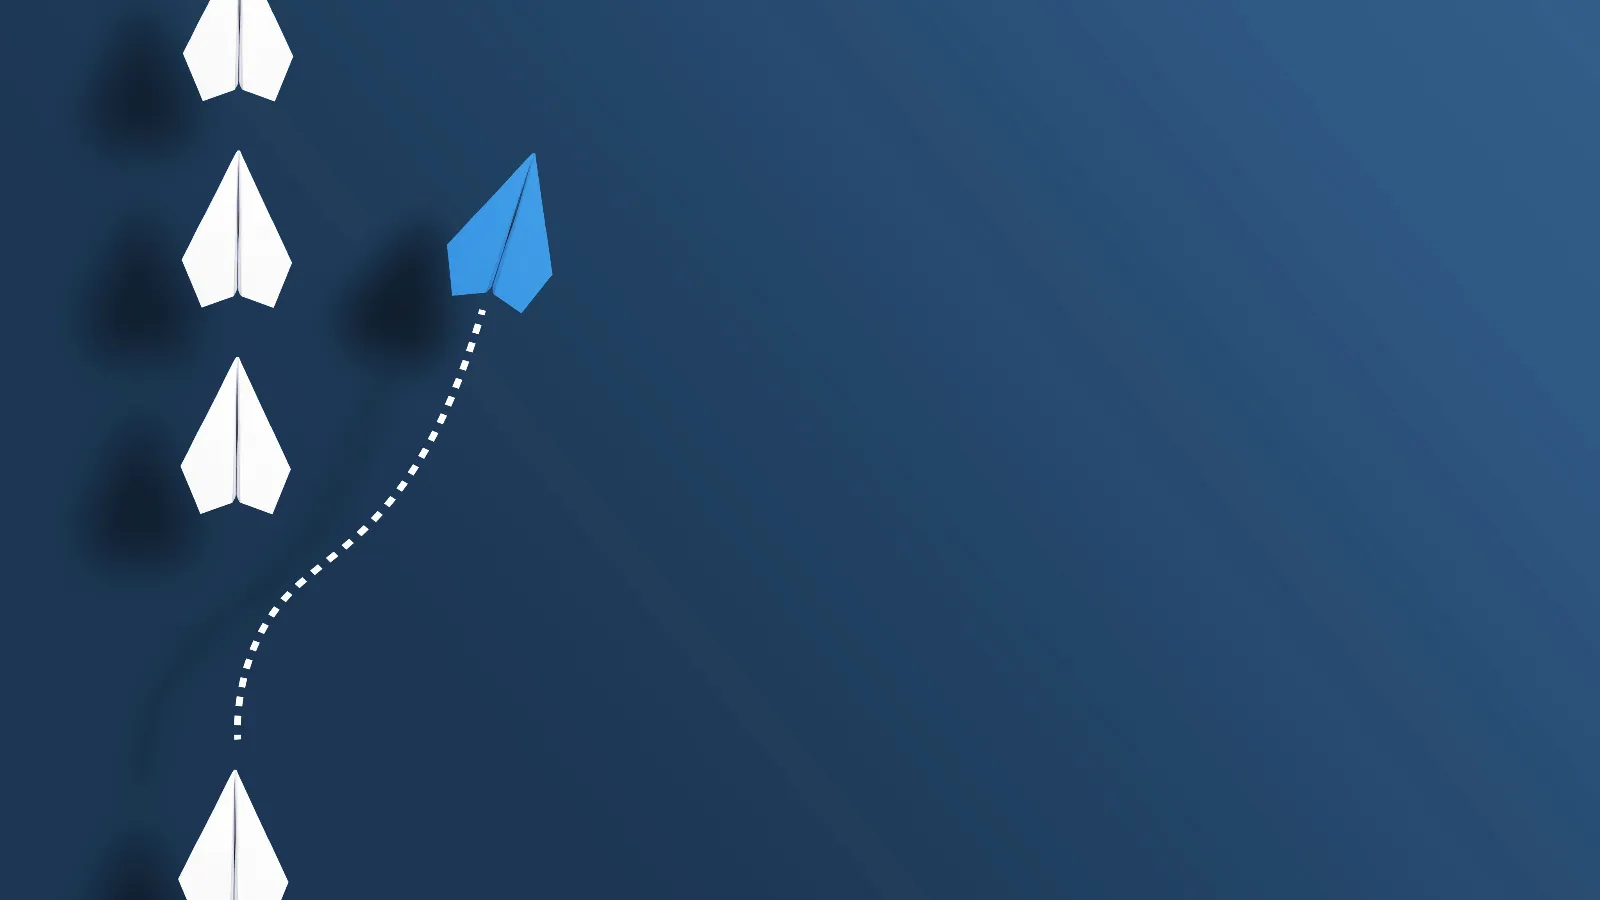 A graphic of a line of paper airplanes with one veering off to the right.